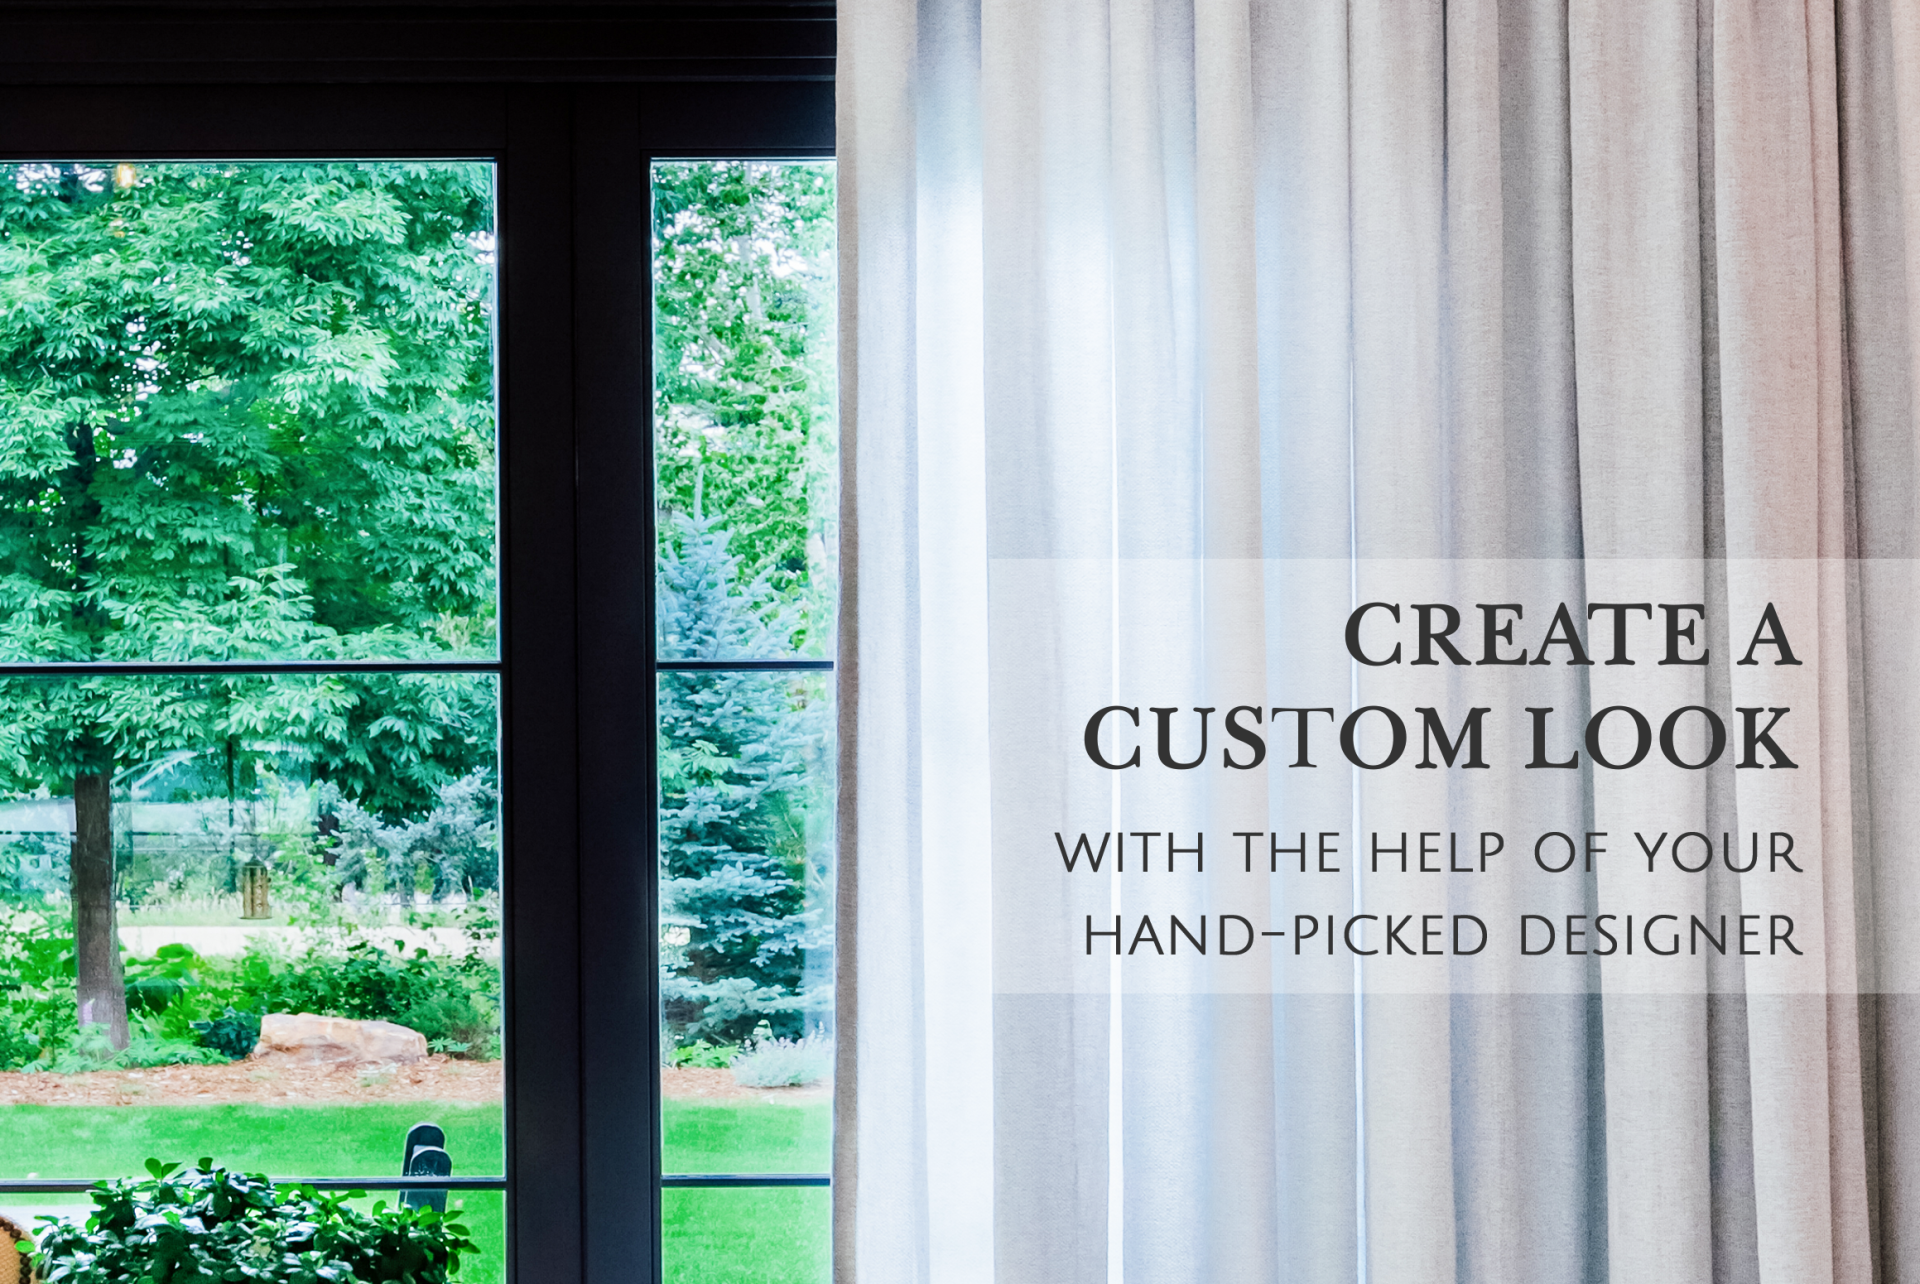 Hand-picked designer text over light blue curtains and view of backyard